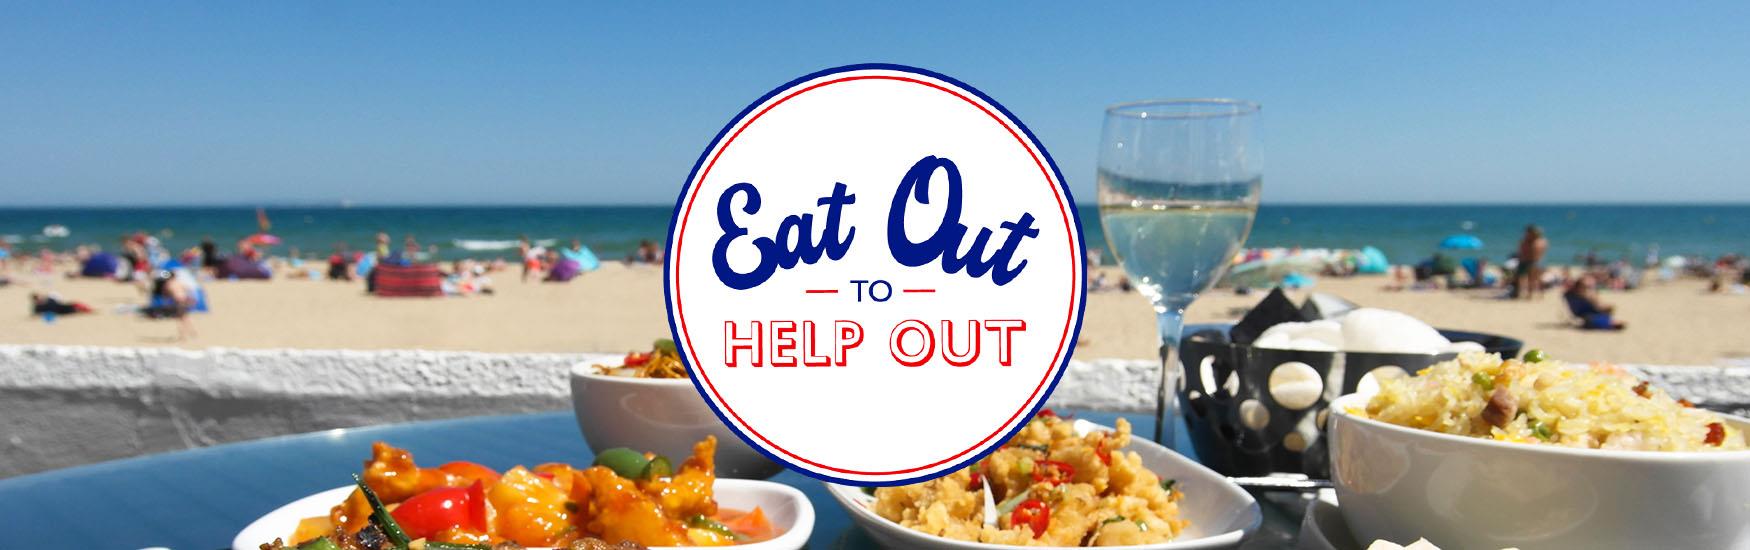 eat out to help out logo and food header image